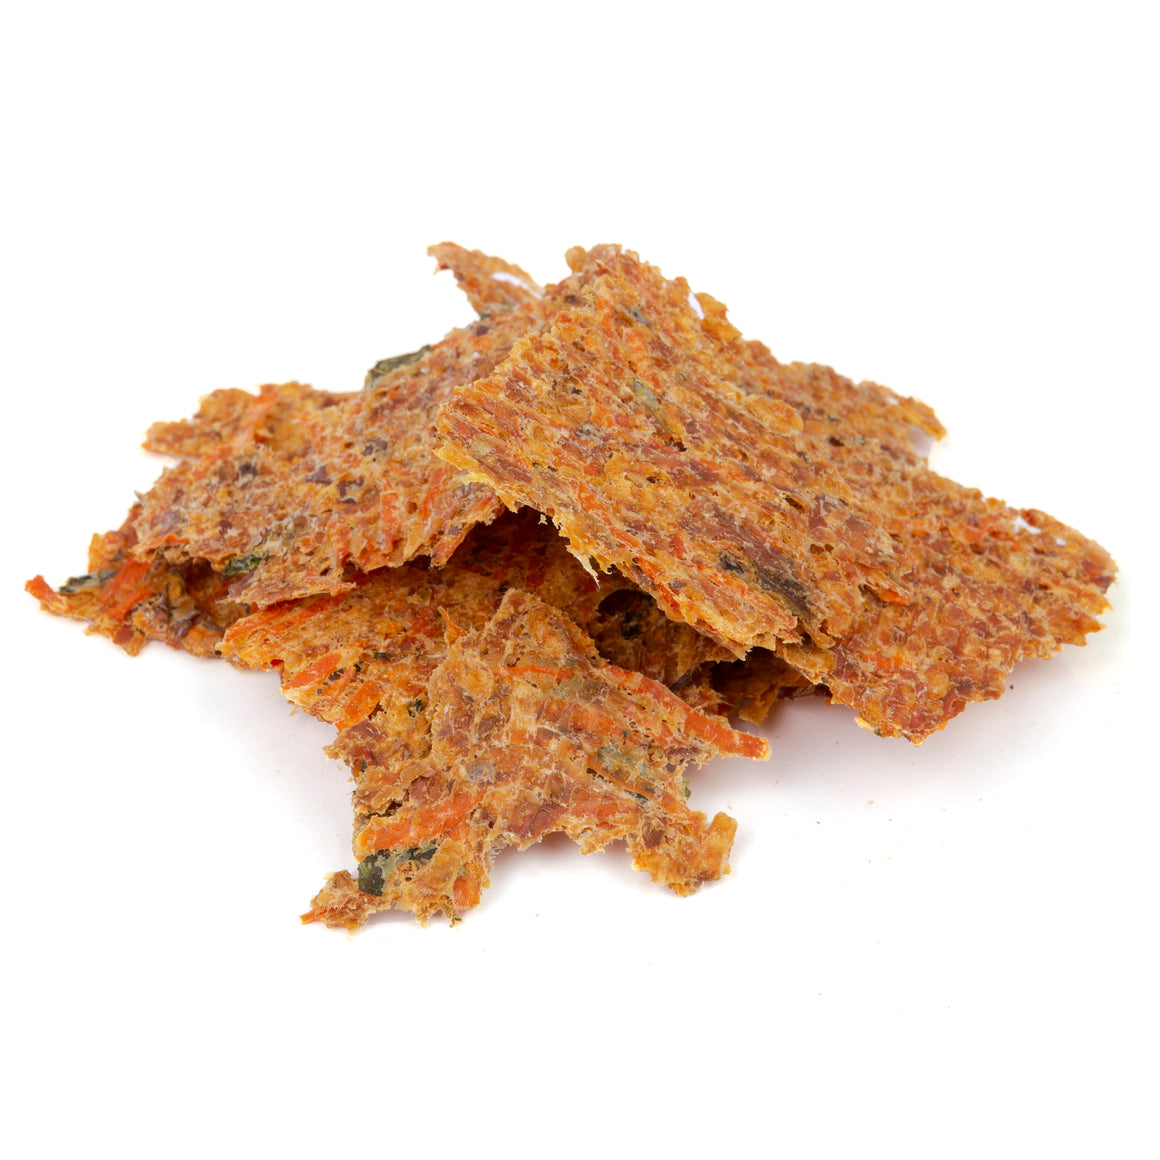 Turkey Crisps with Carrot, Apple and Kale